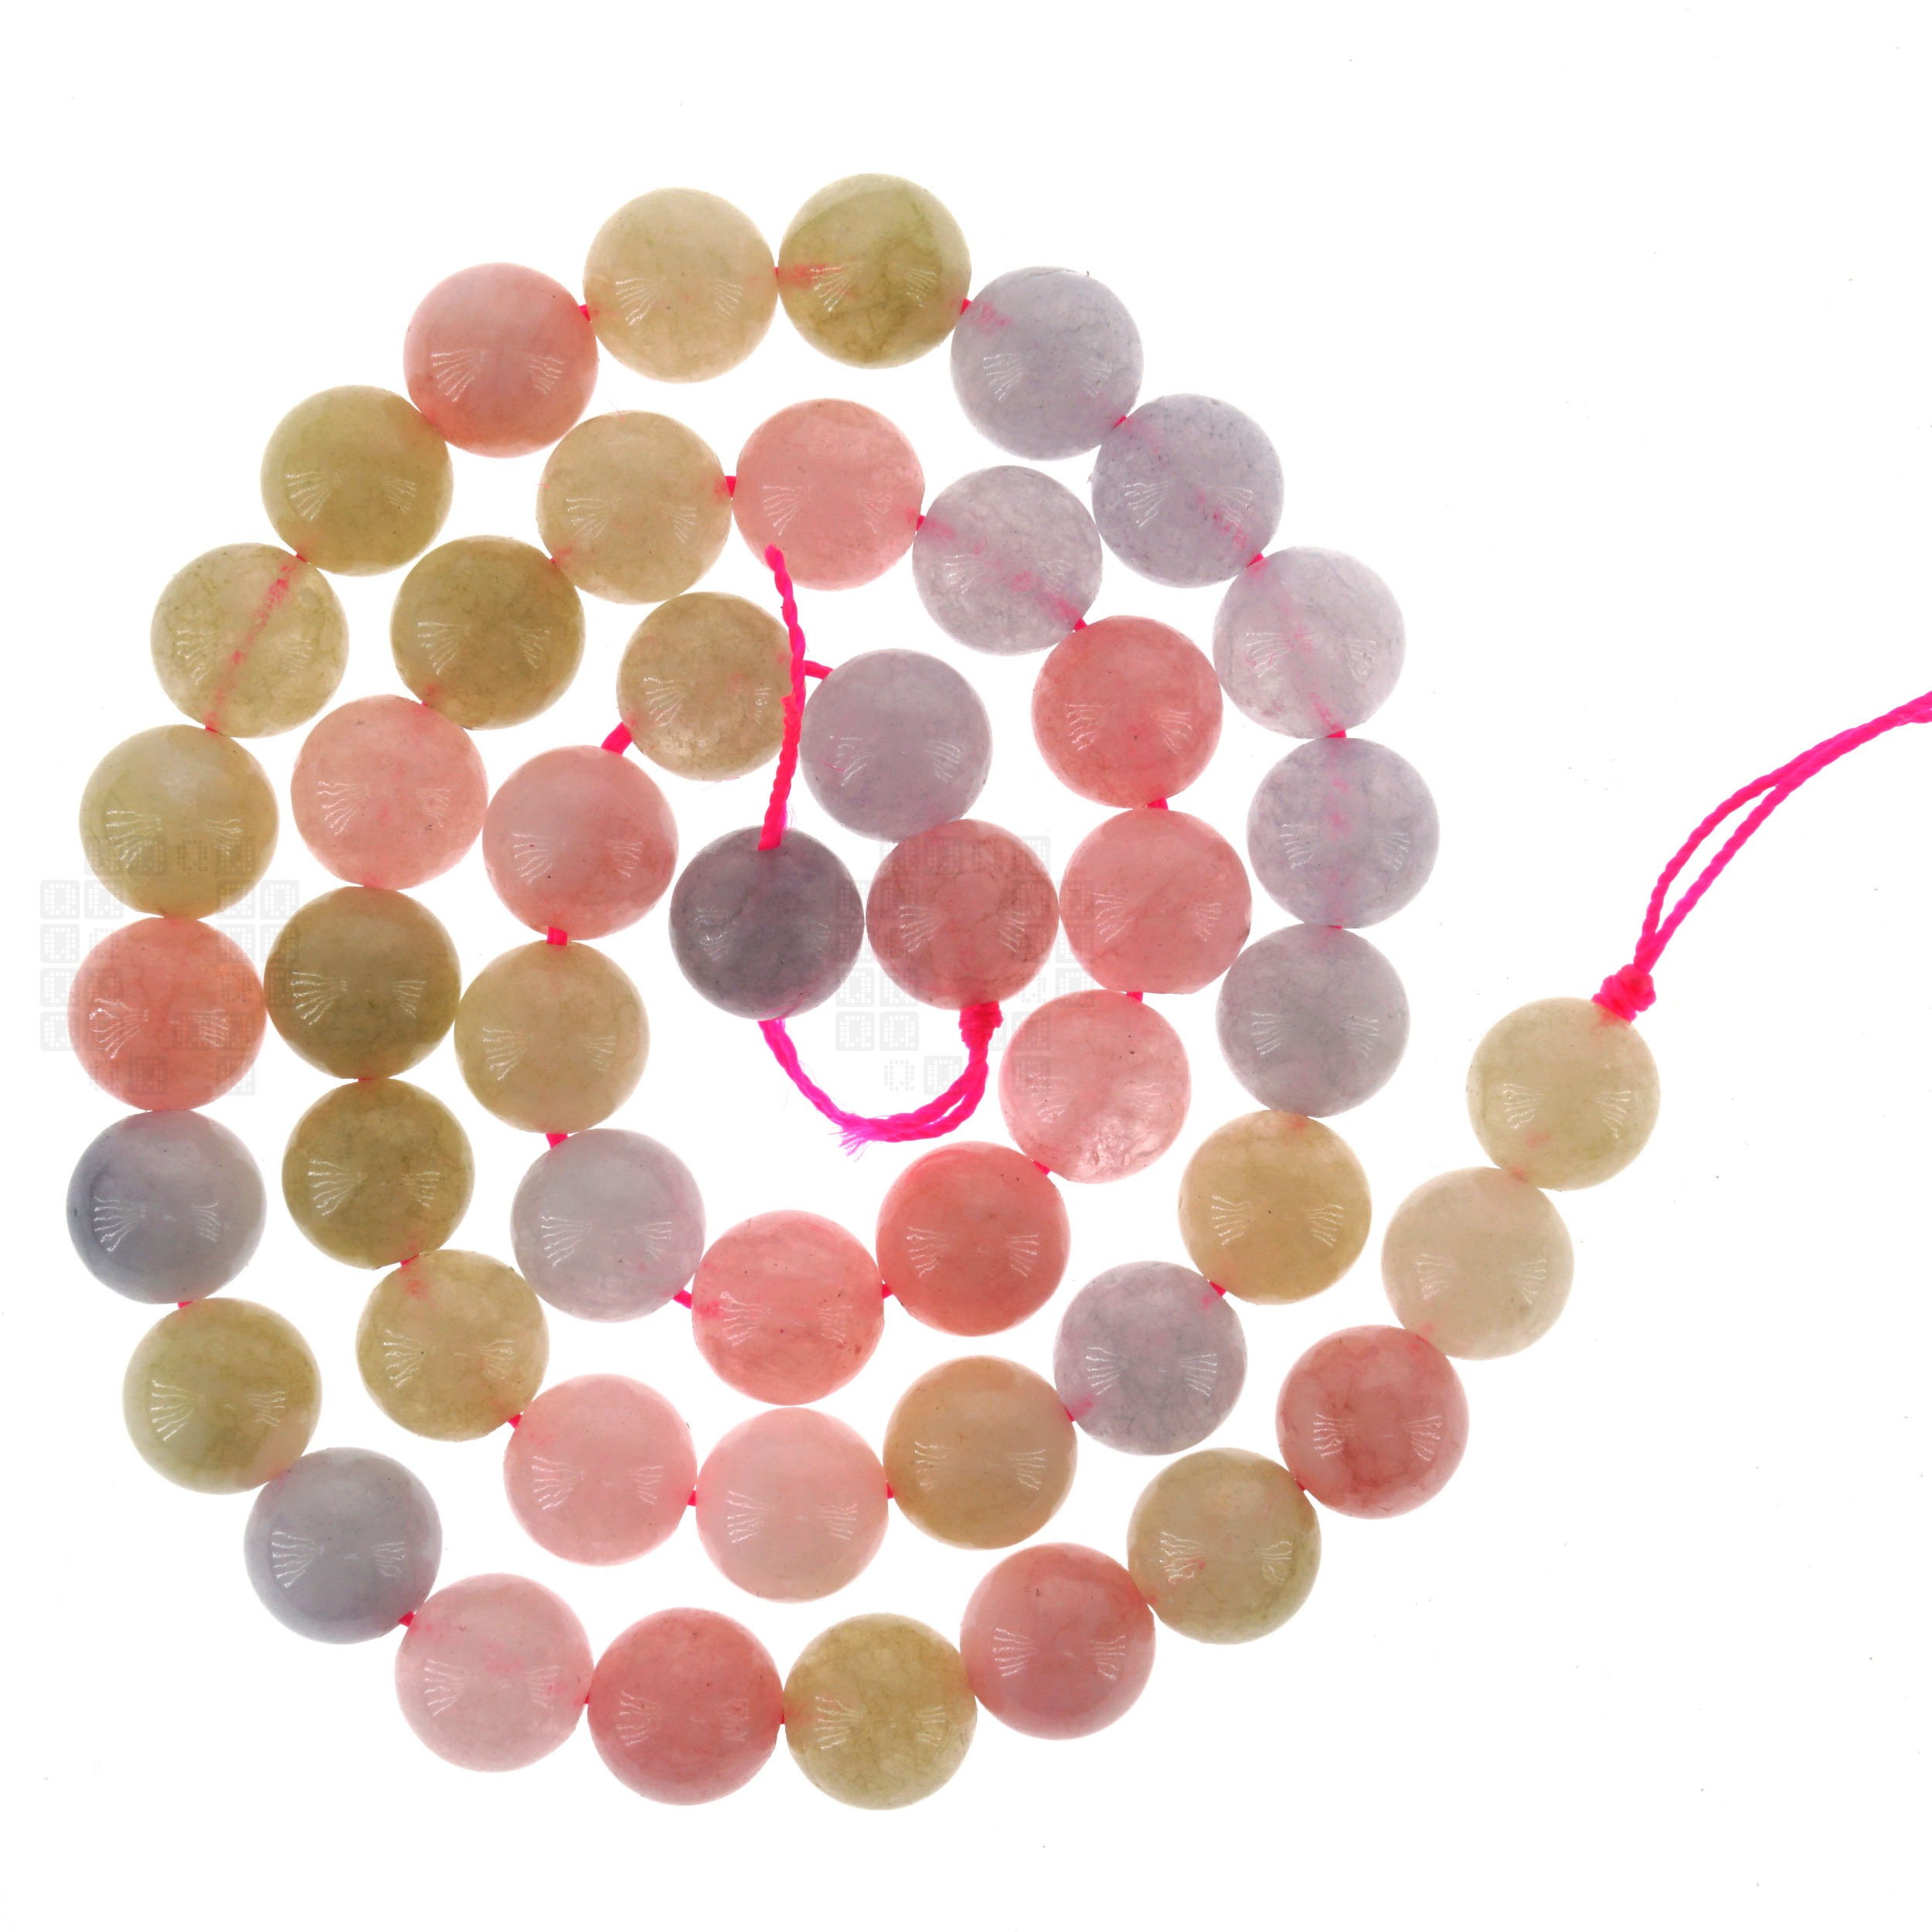 Morganite Agate 8mm Natural Round Beads, 45 Pieces